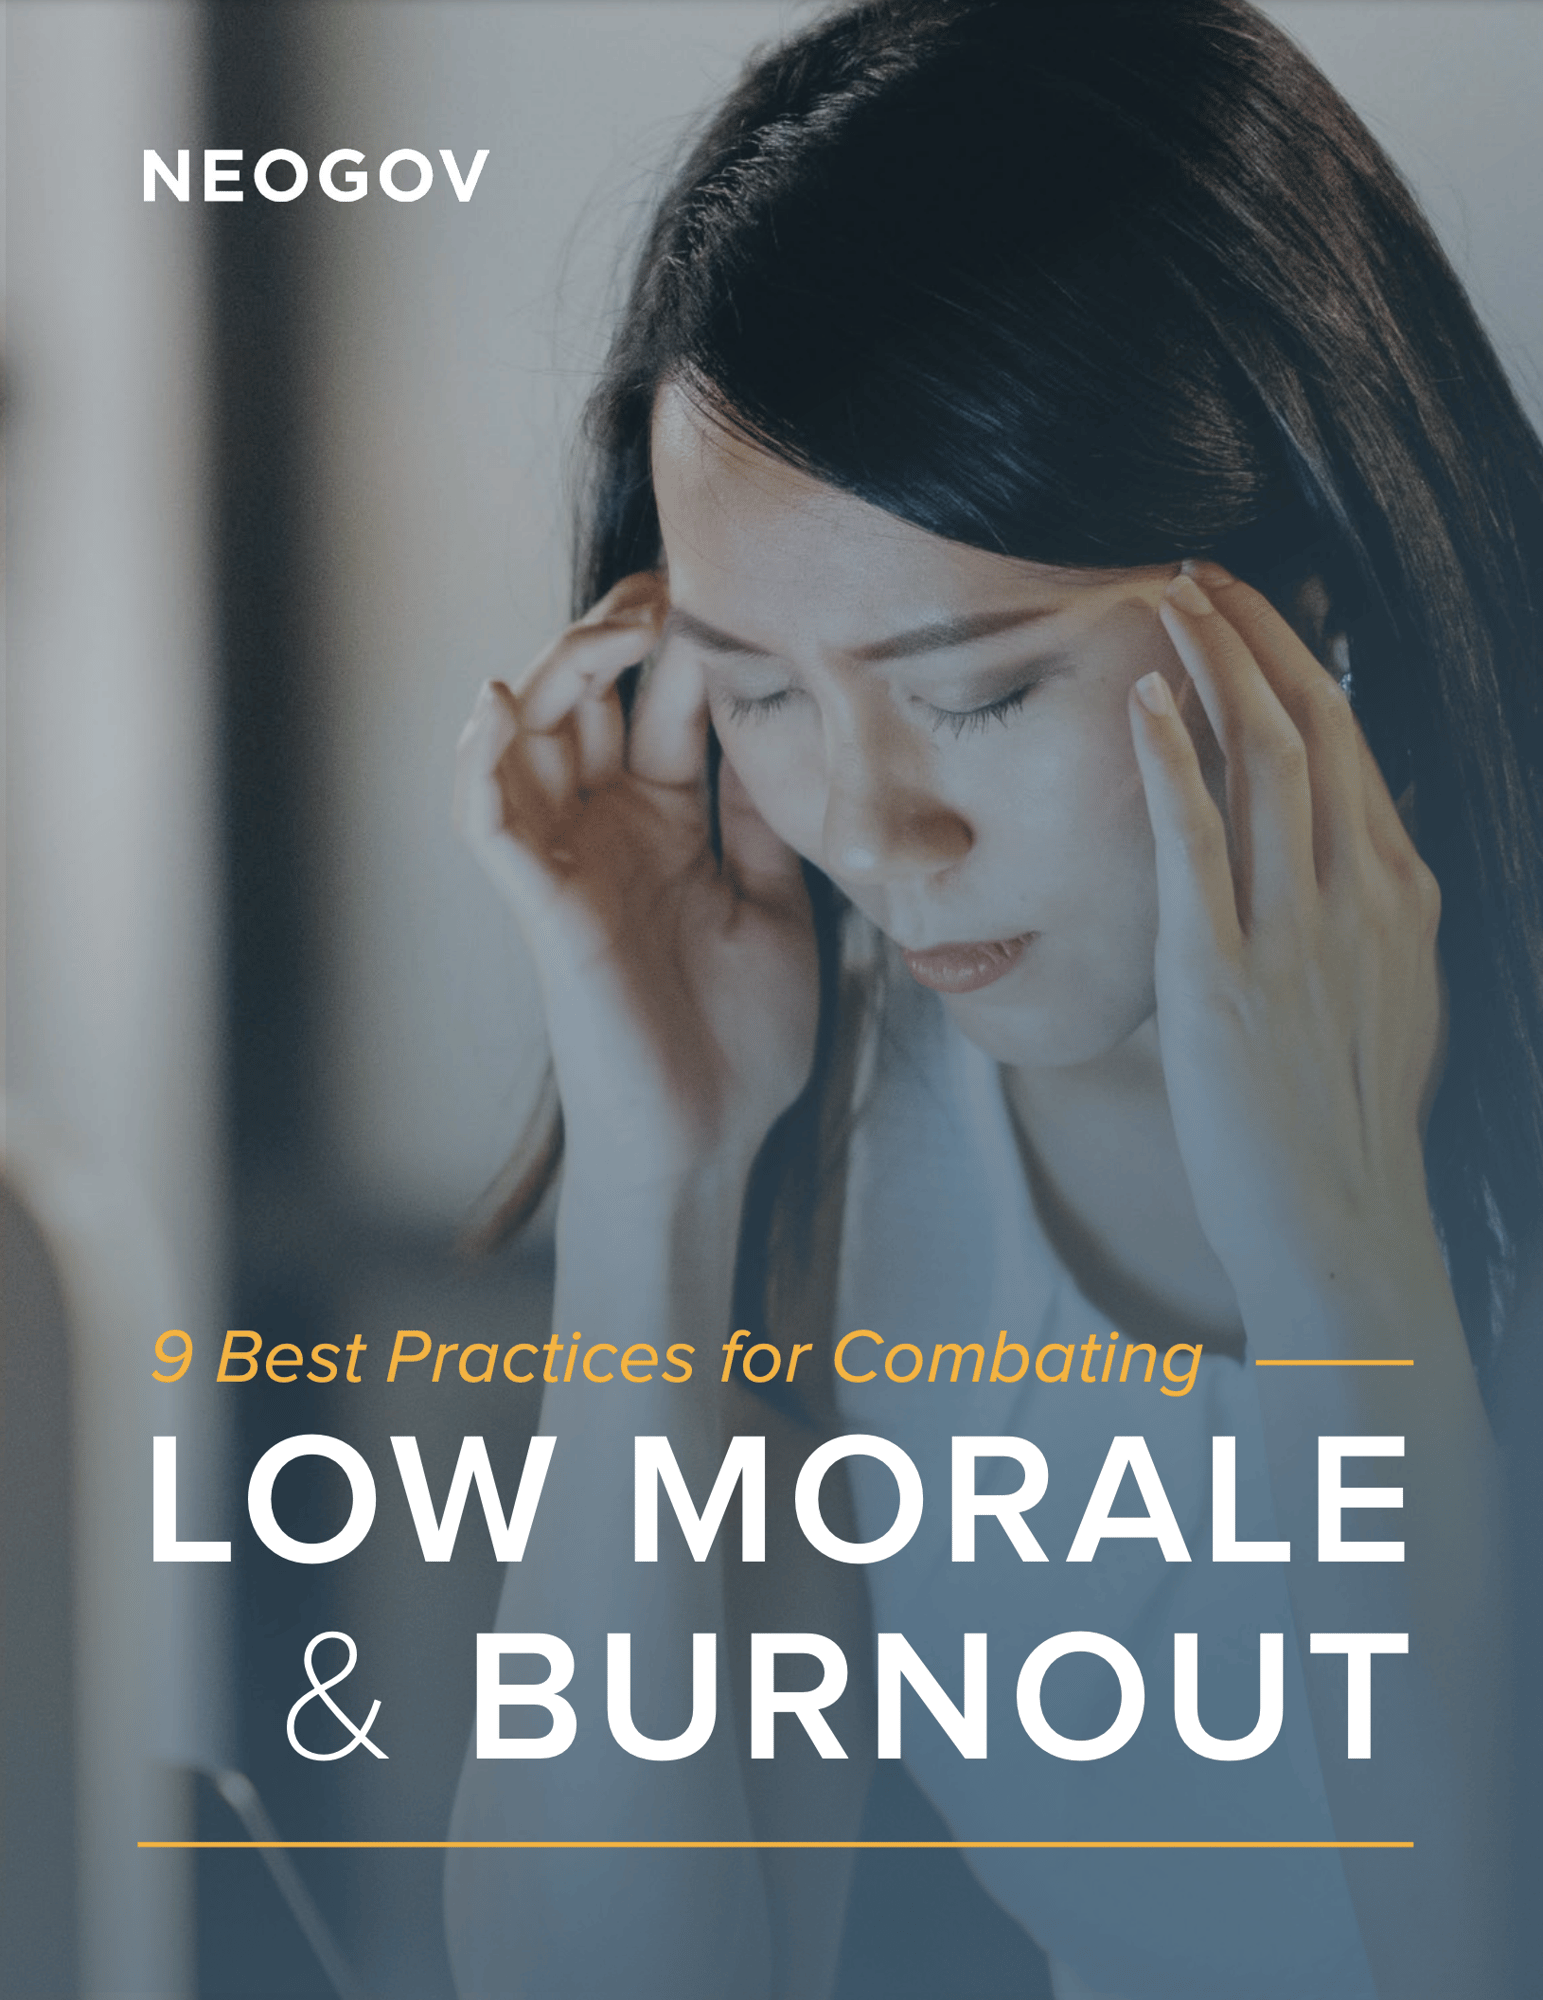 9 Best Practices for Combatting Low Morale & Burnout report cover